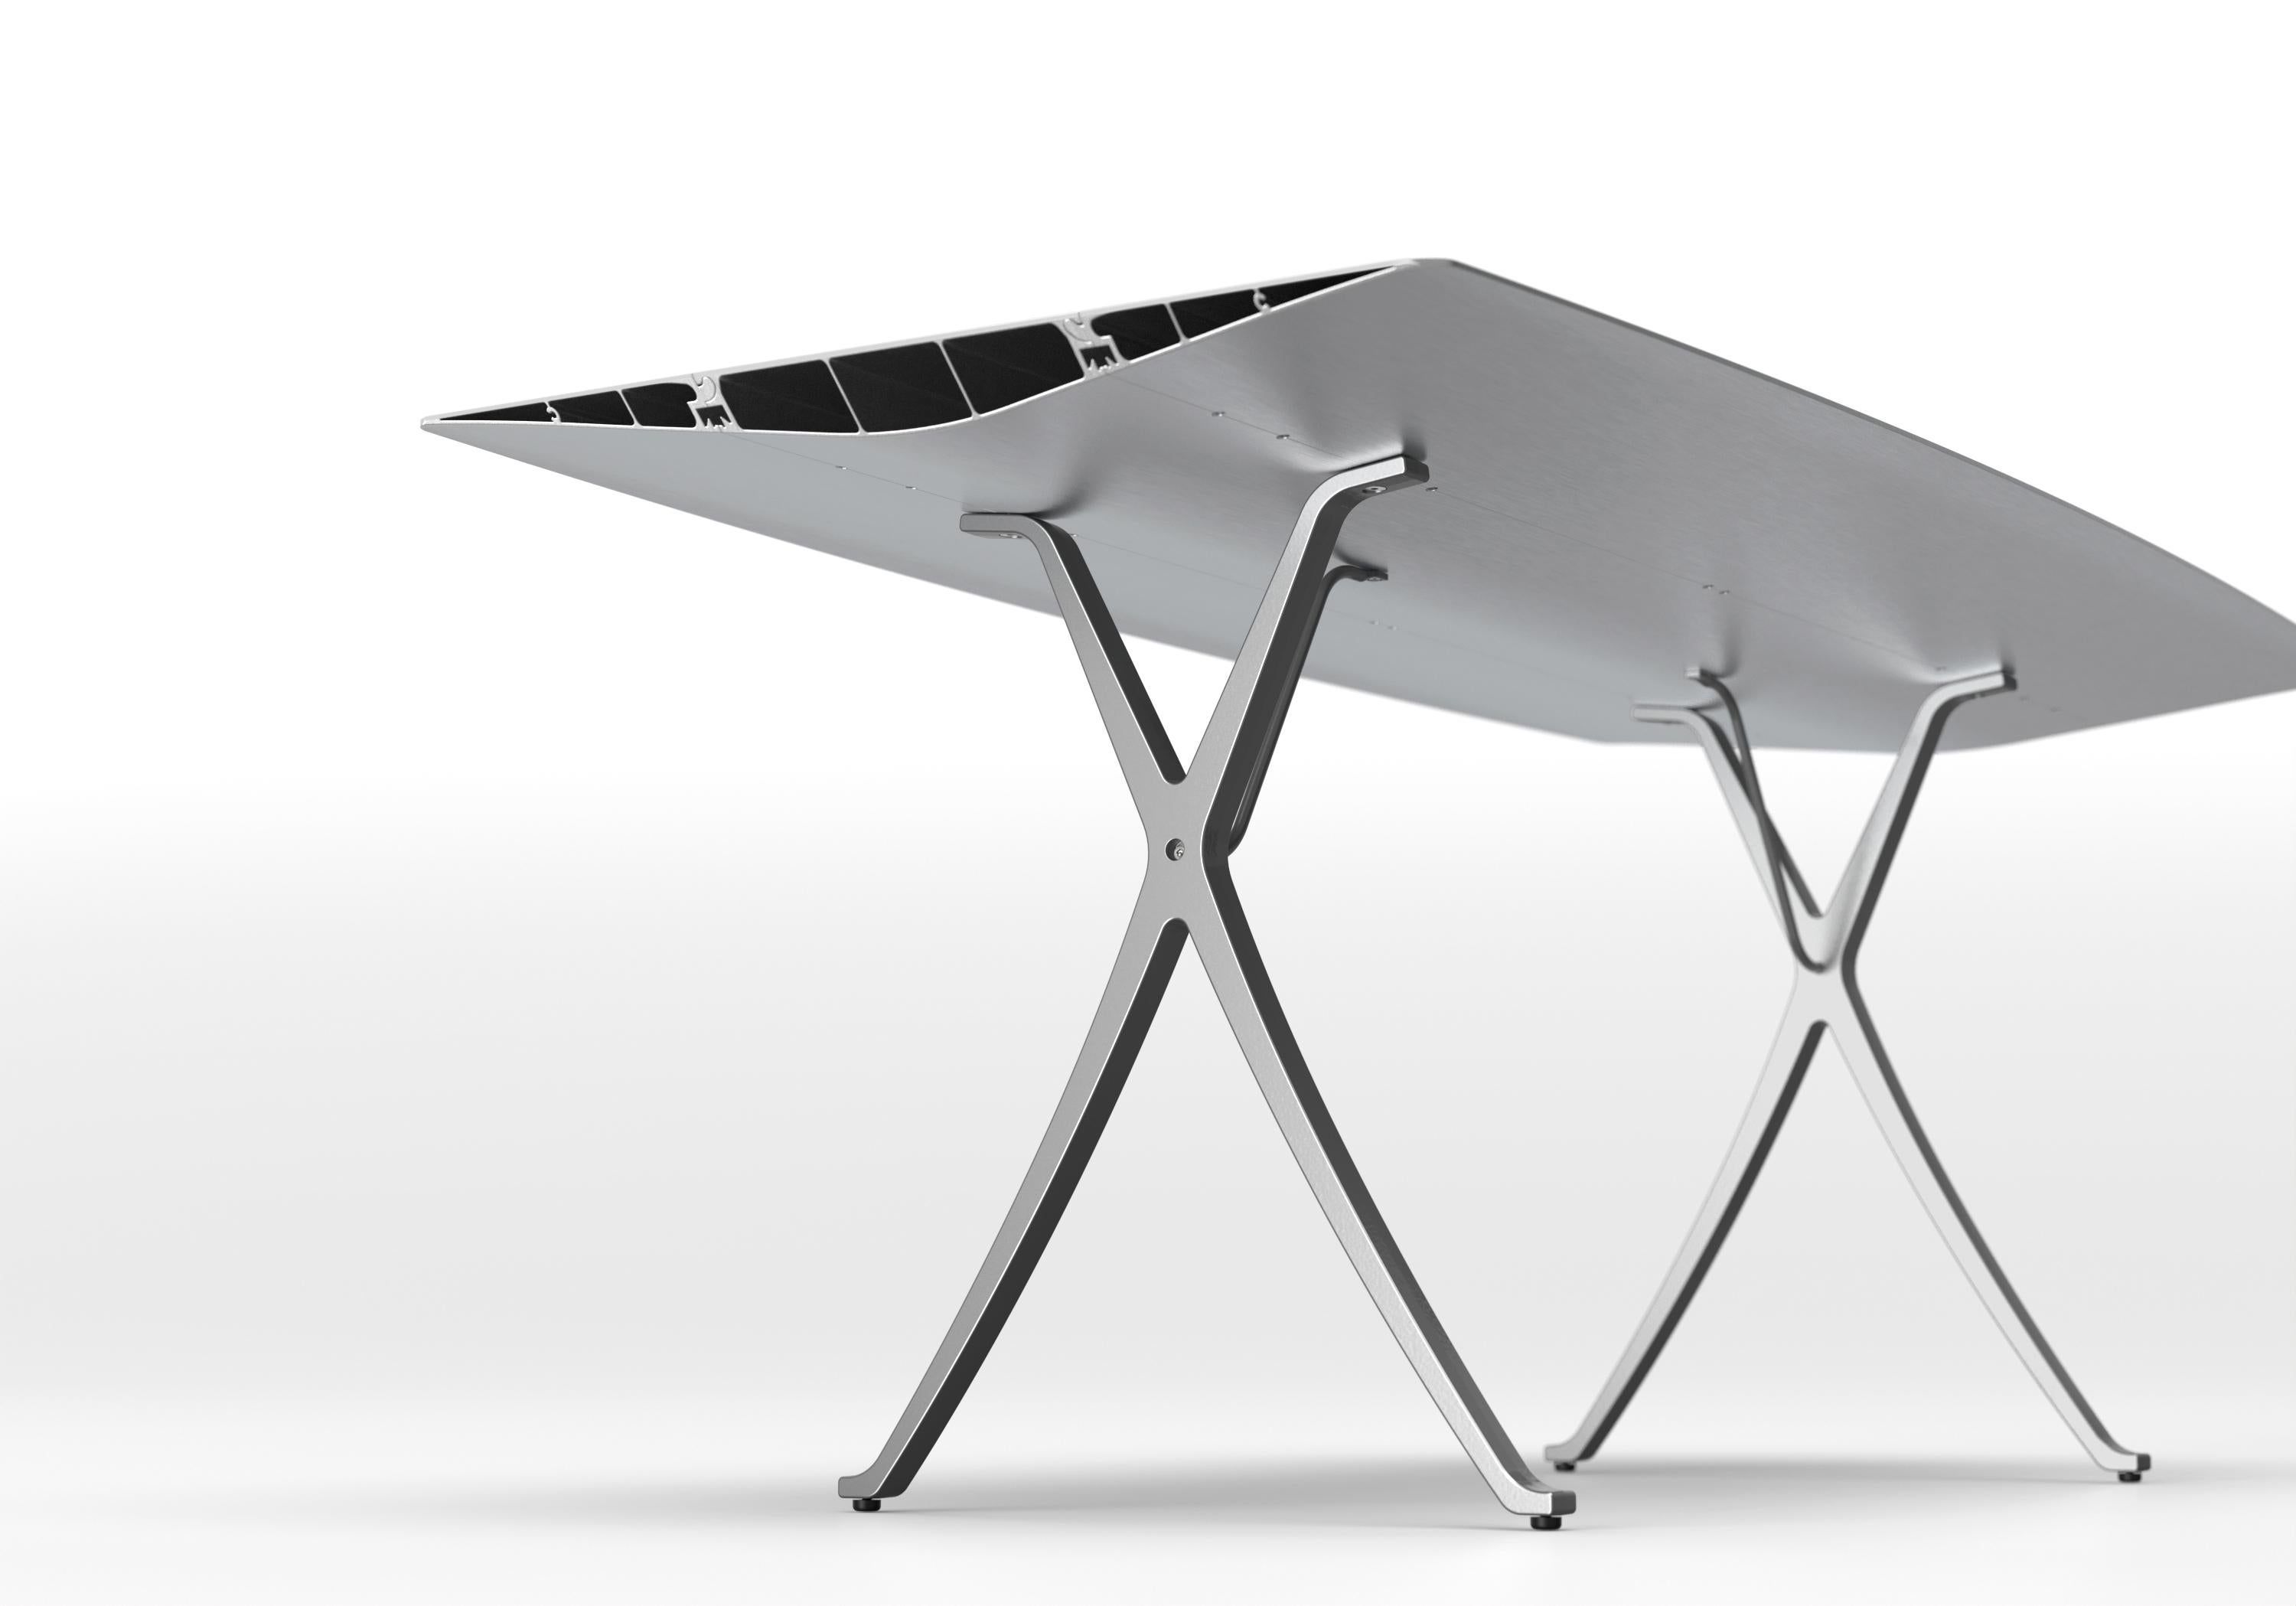 The Table B, which inaugurated the Extrusions Collection in 2009, can reach up to five metres using a simple profile of extruded aluminium. Its apparent simplicity covers a complex technical development where important engineers have participated.